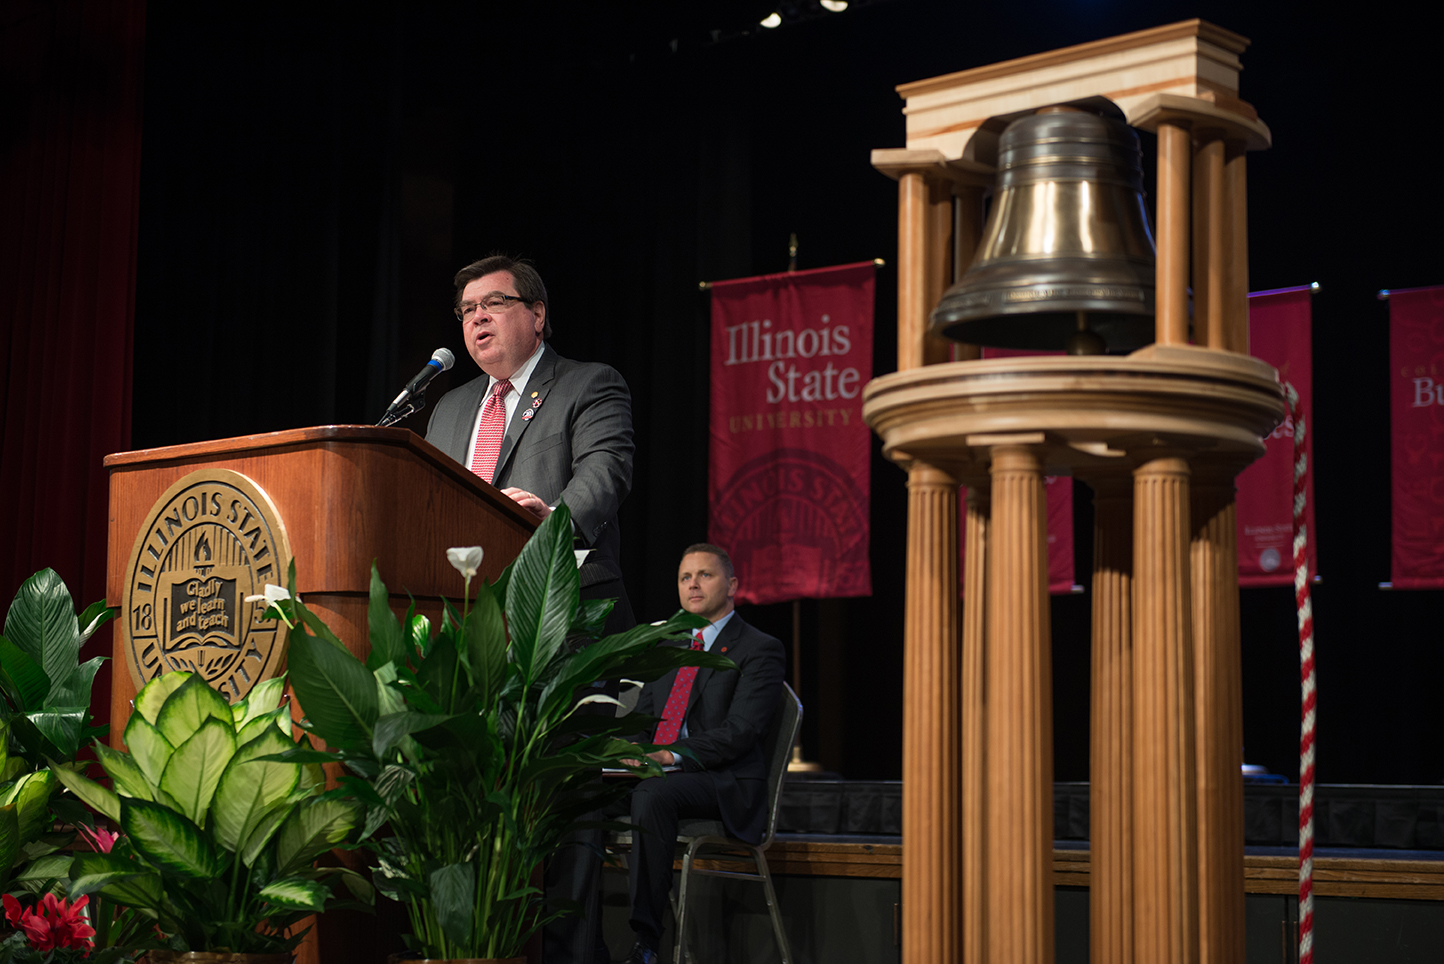 President Larry Dietz at a podium with the replica of the Founders Bell beside him.